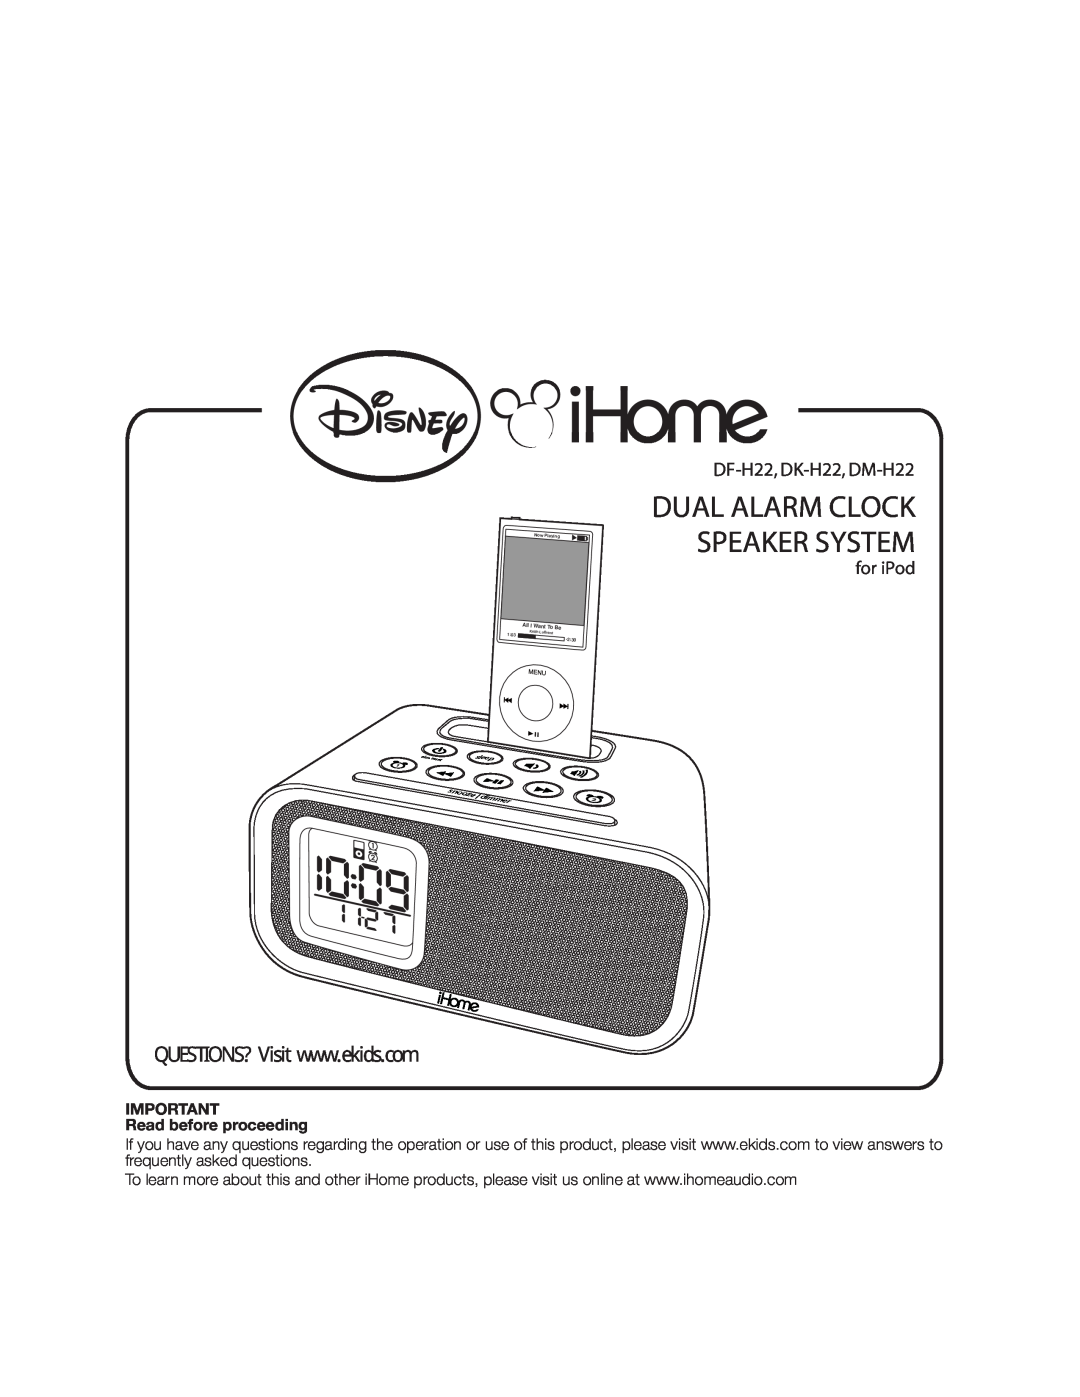 iHome ihome warranty Maintenance, A Consumer Guide to Product Safety, Limited 1 Year Warranty Information, QDID B020568 